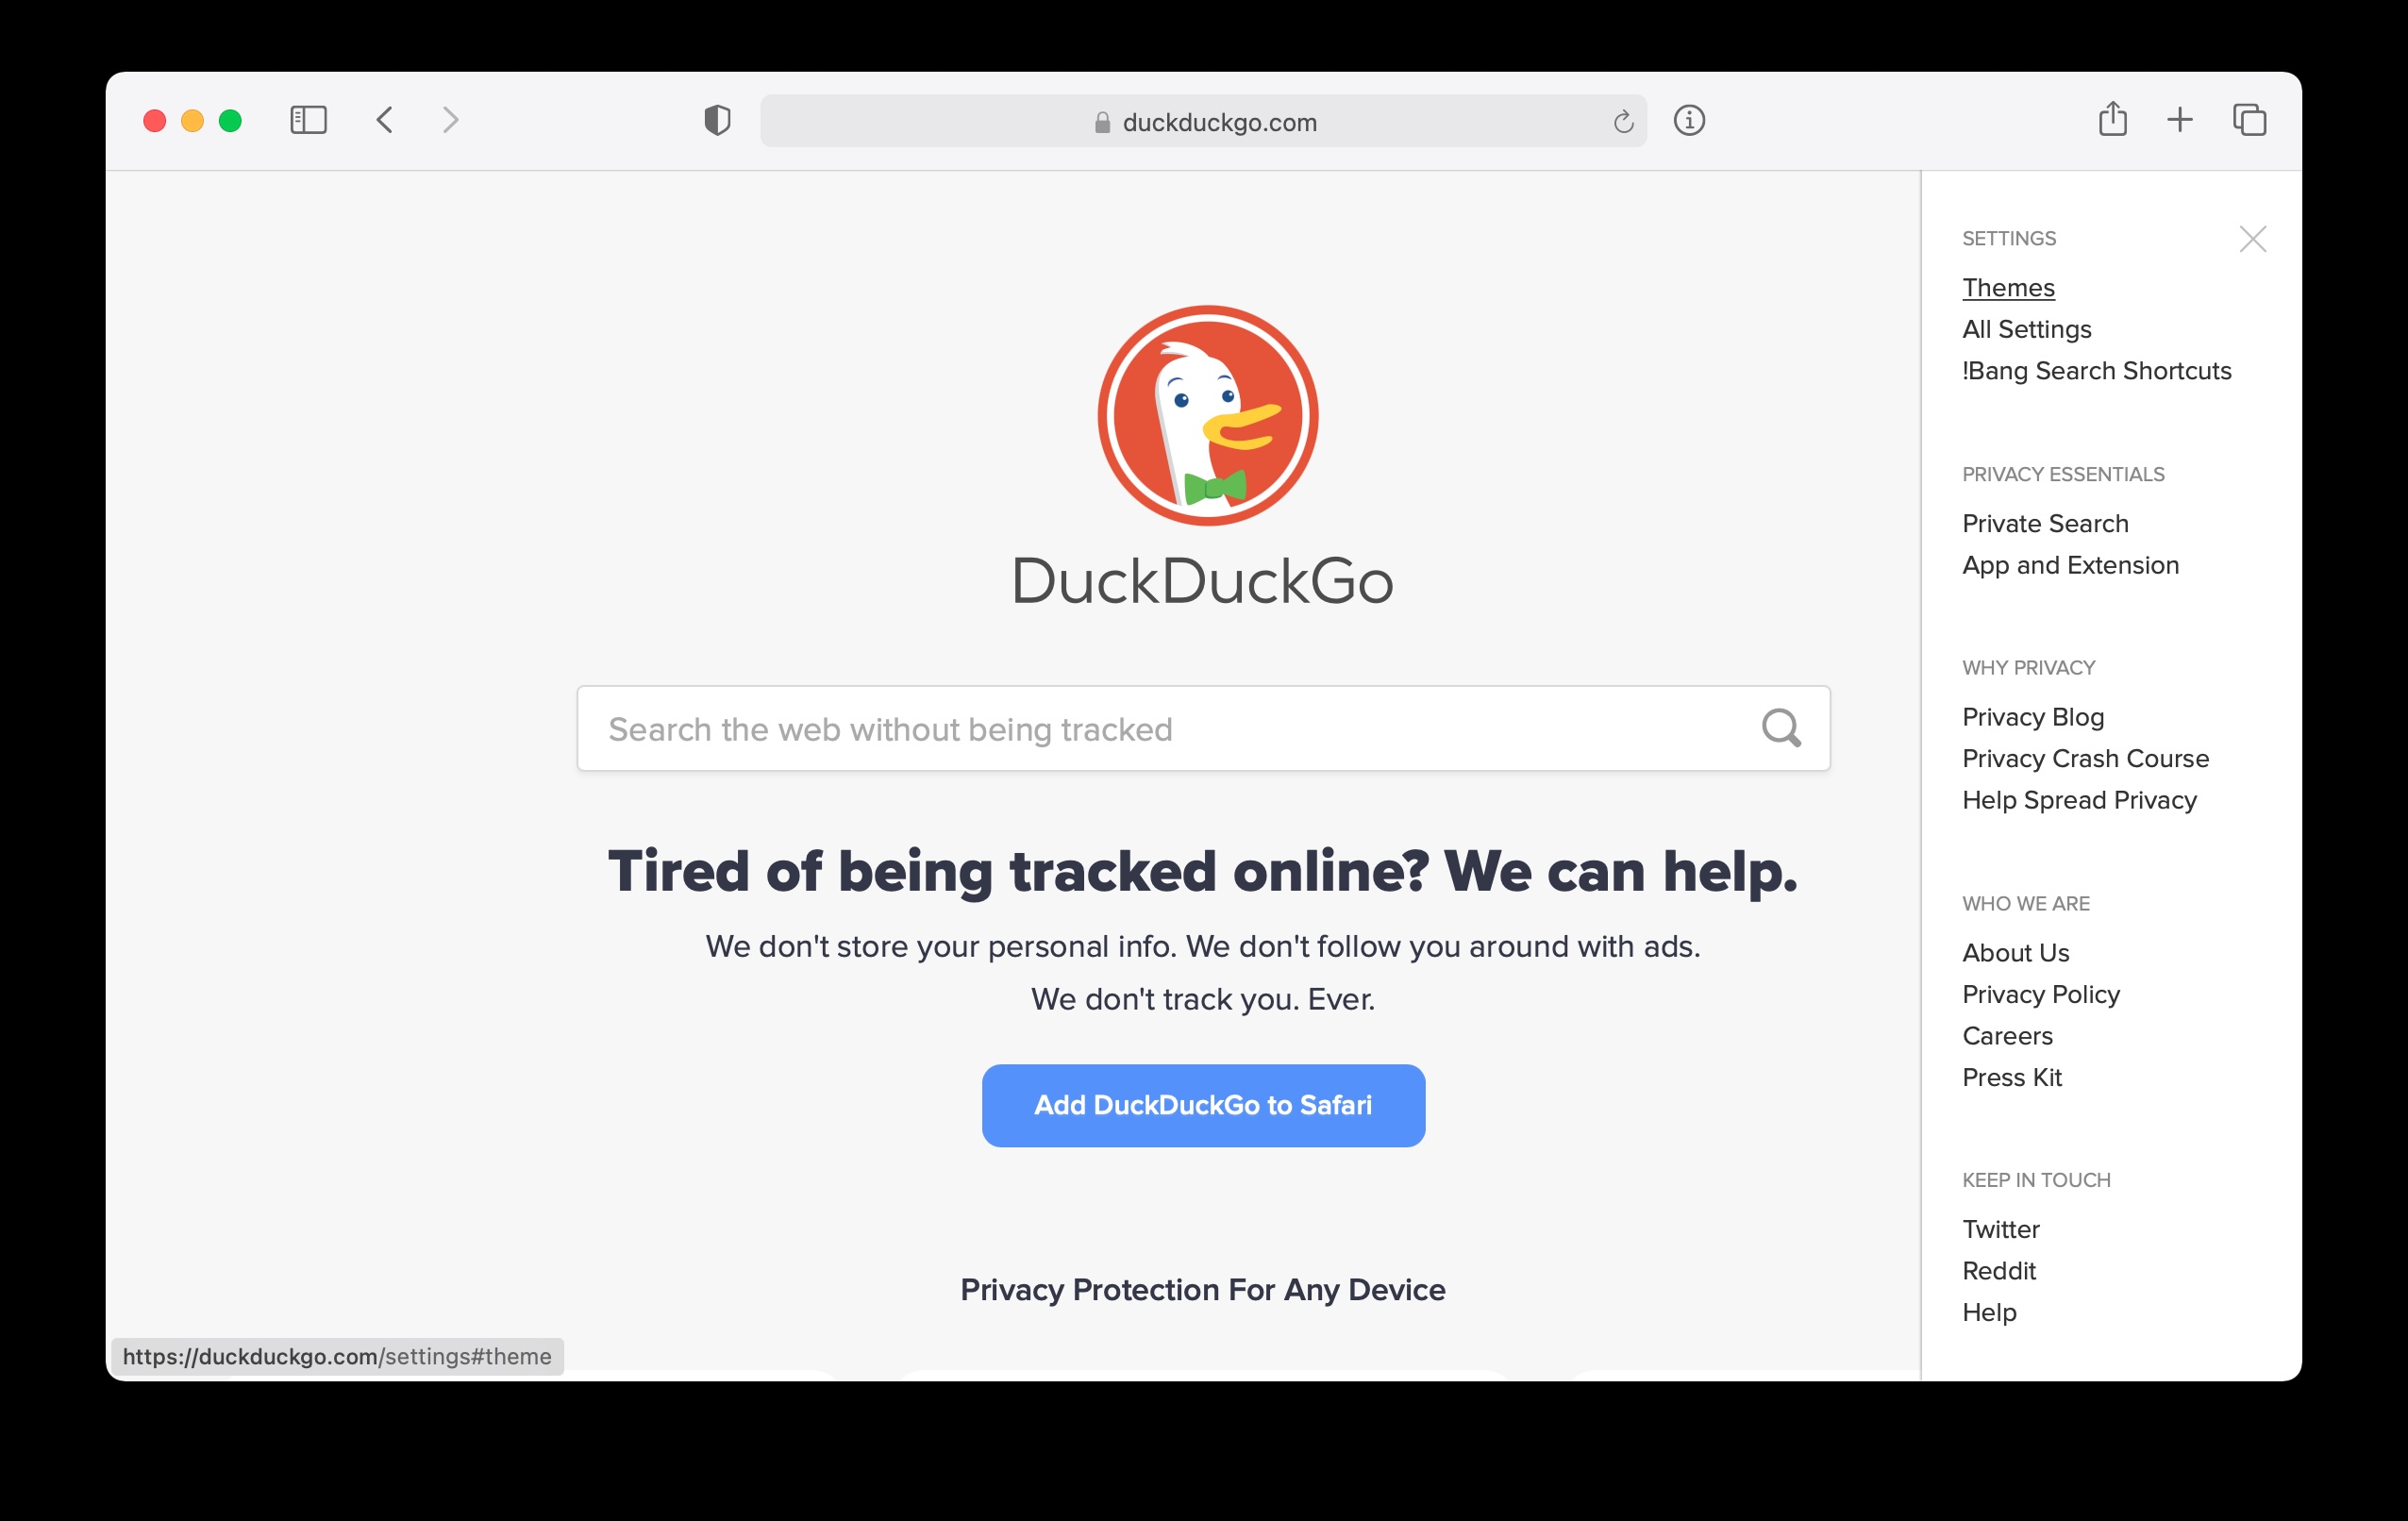 How to Enable / Disable Dark Mode Theme on DuckDuckGo